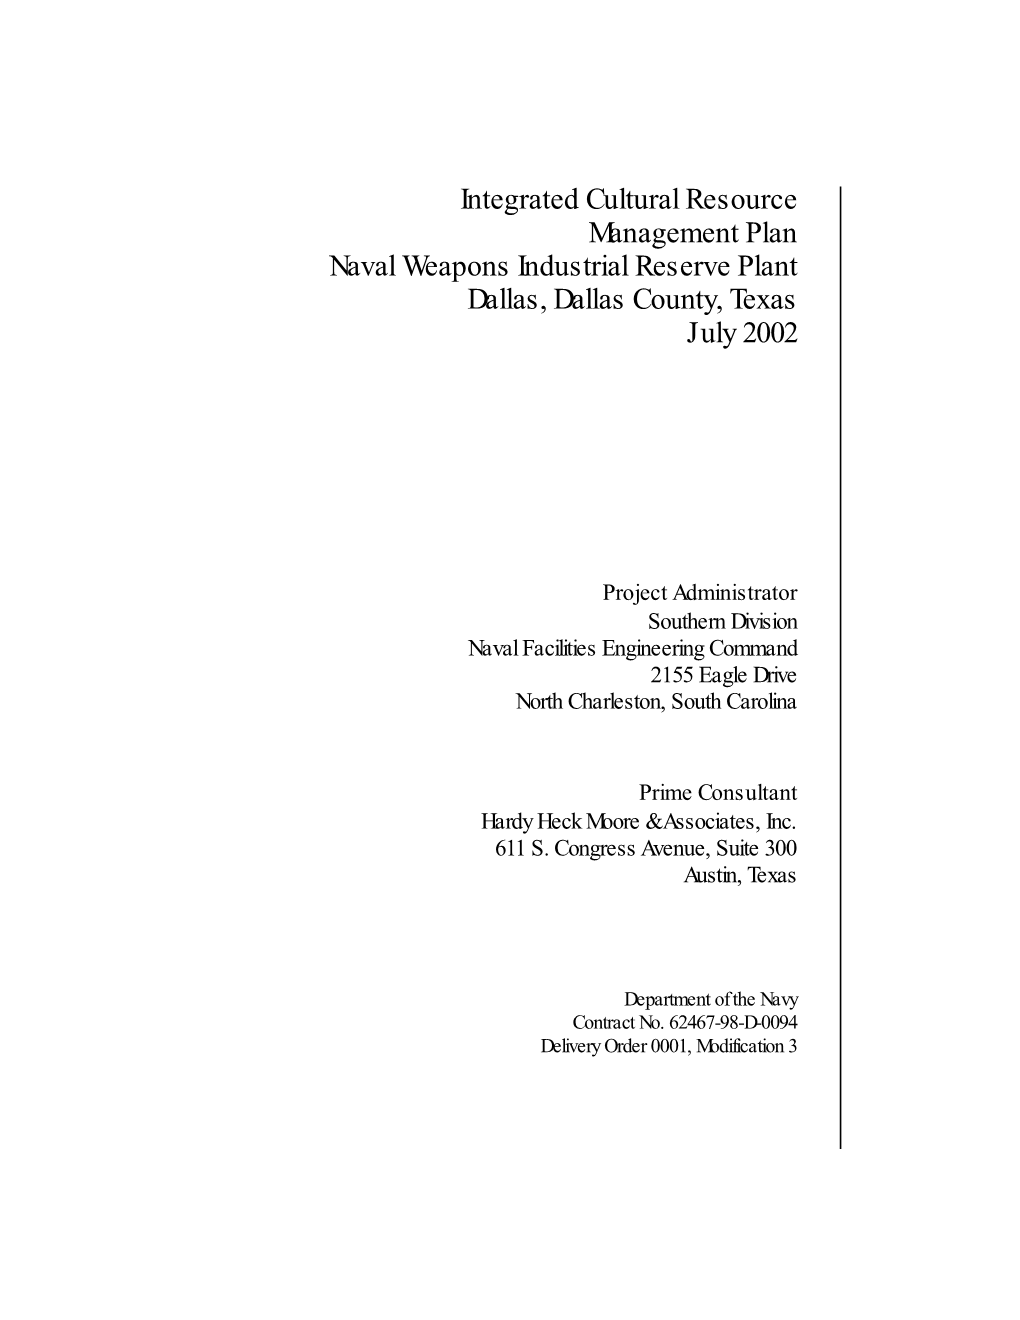 Integrated Cultural Resource Management Plan Naval Weapons Industrial Reserve Plant Dallas, Dallas County, Texas July 2002